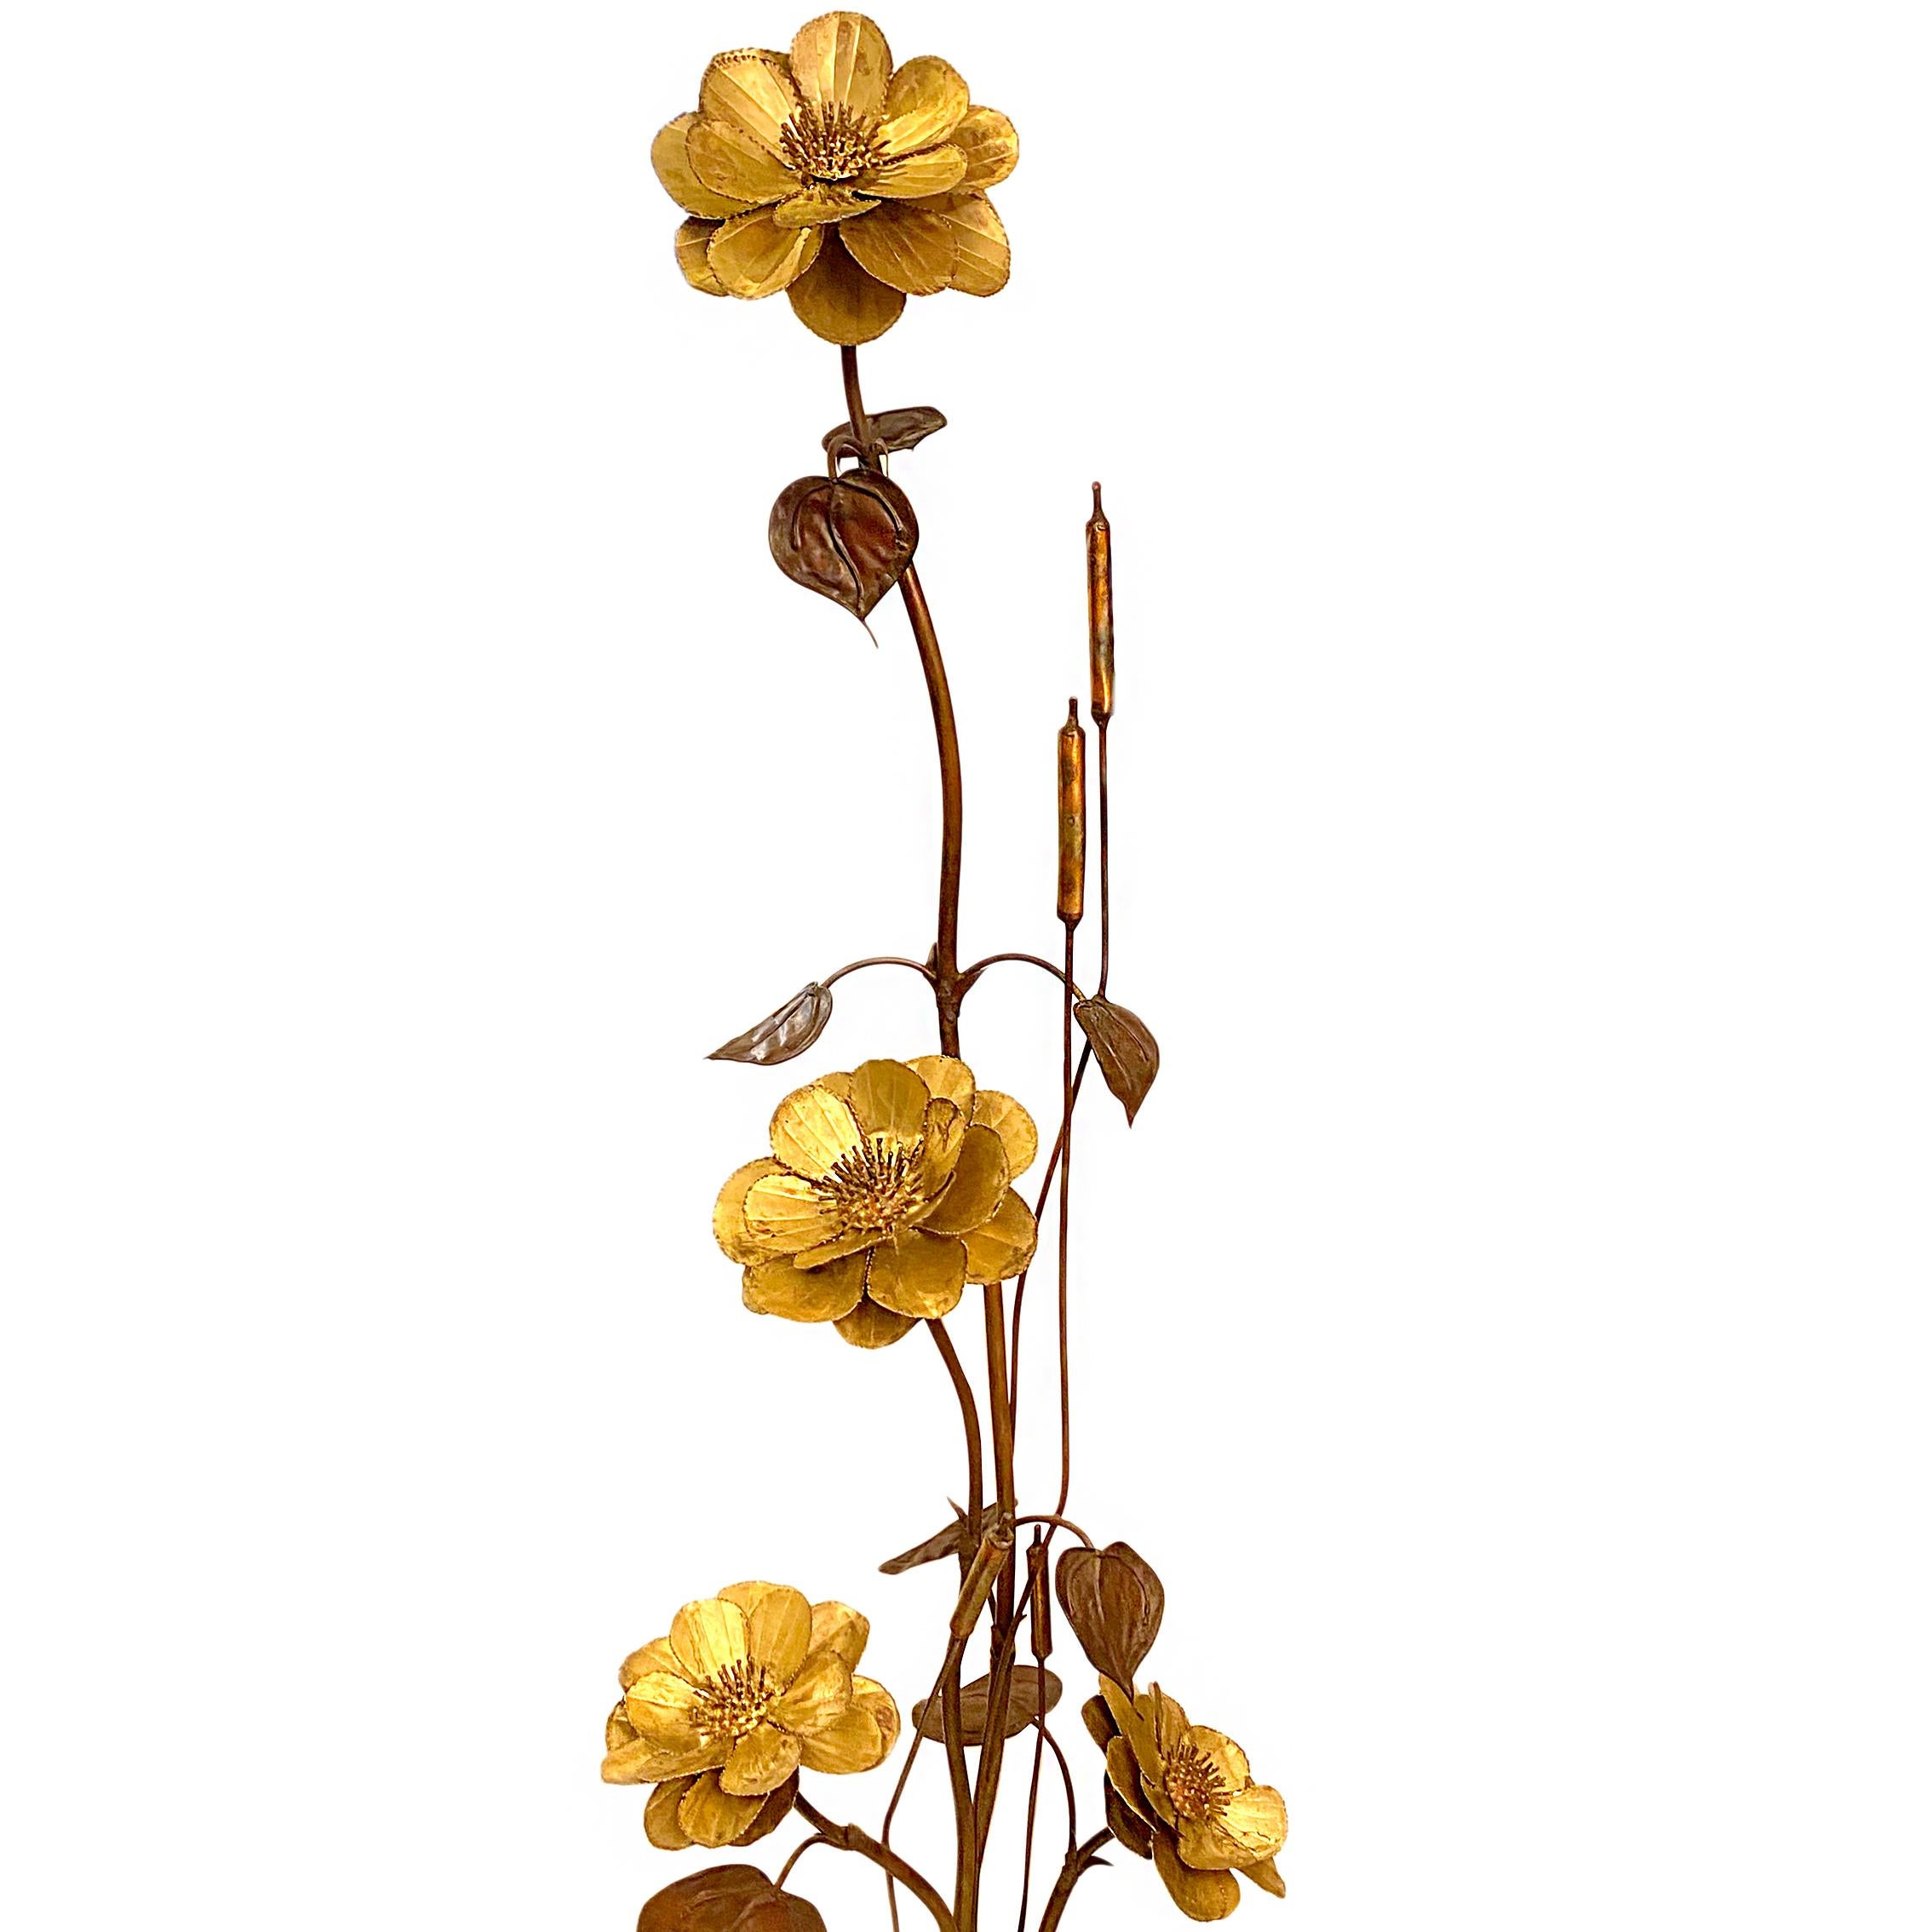 A large circa 1960's Italian repoussé metal foliage and floral decoration with stone base.

Measurements:
Height: 66